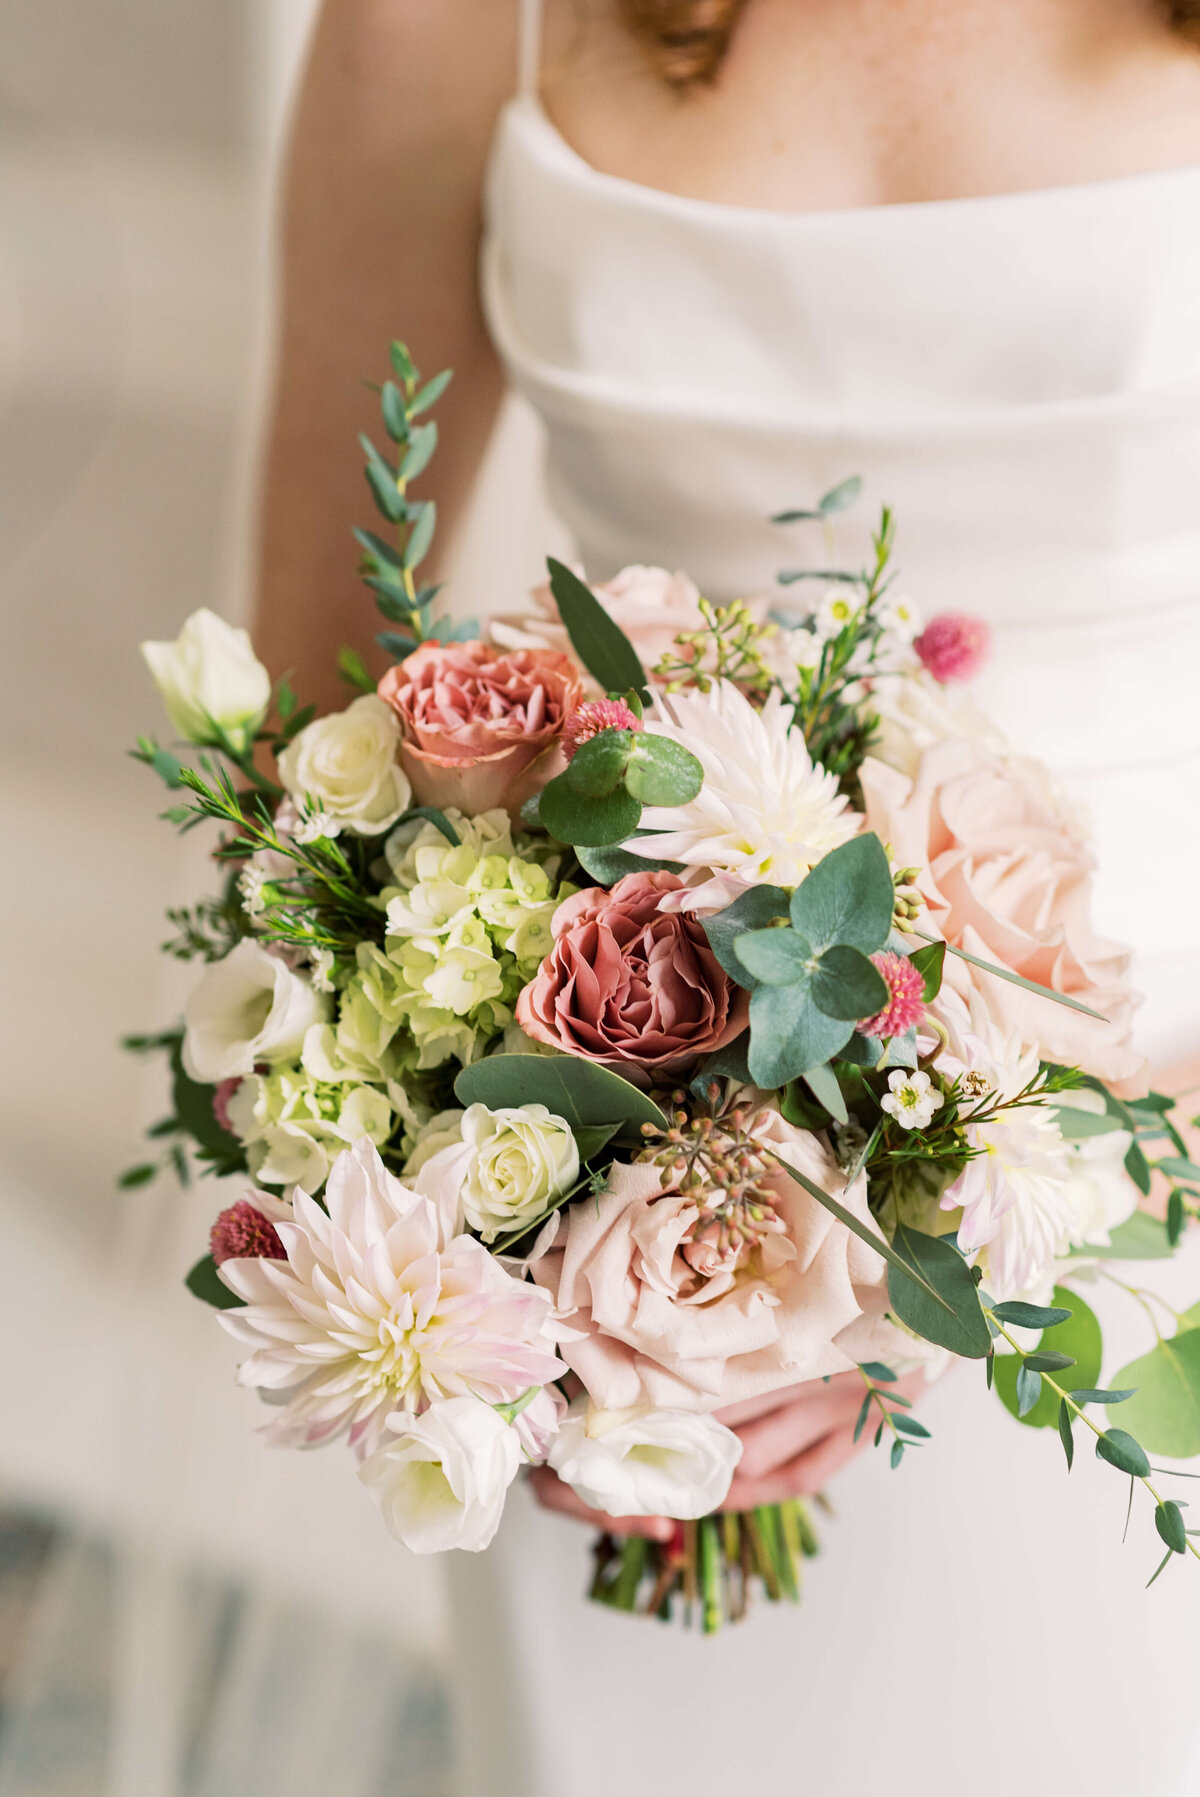 Wedding florals in dusty pink, ivory and greenery at Lord Nelson Hotel wedding in Nova Scotia